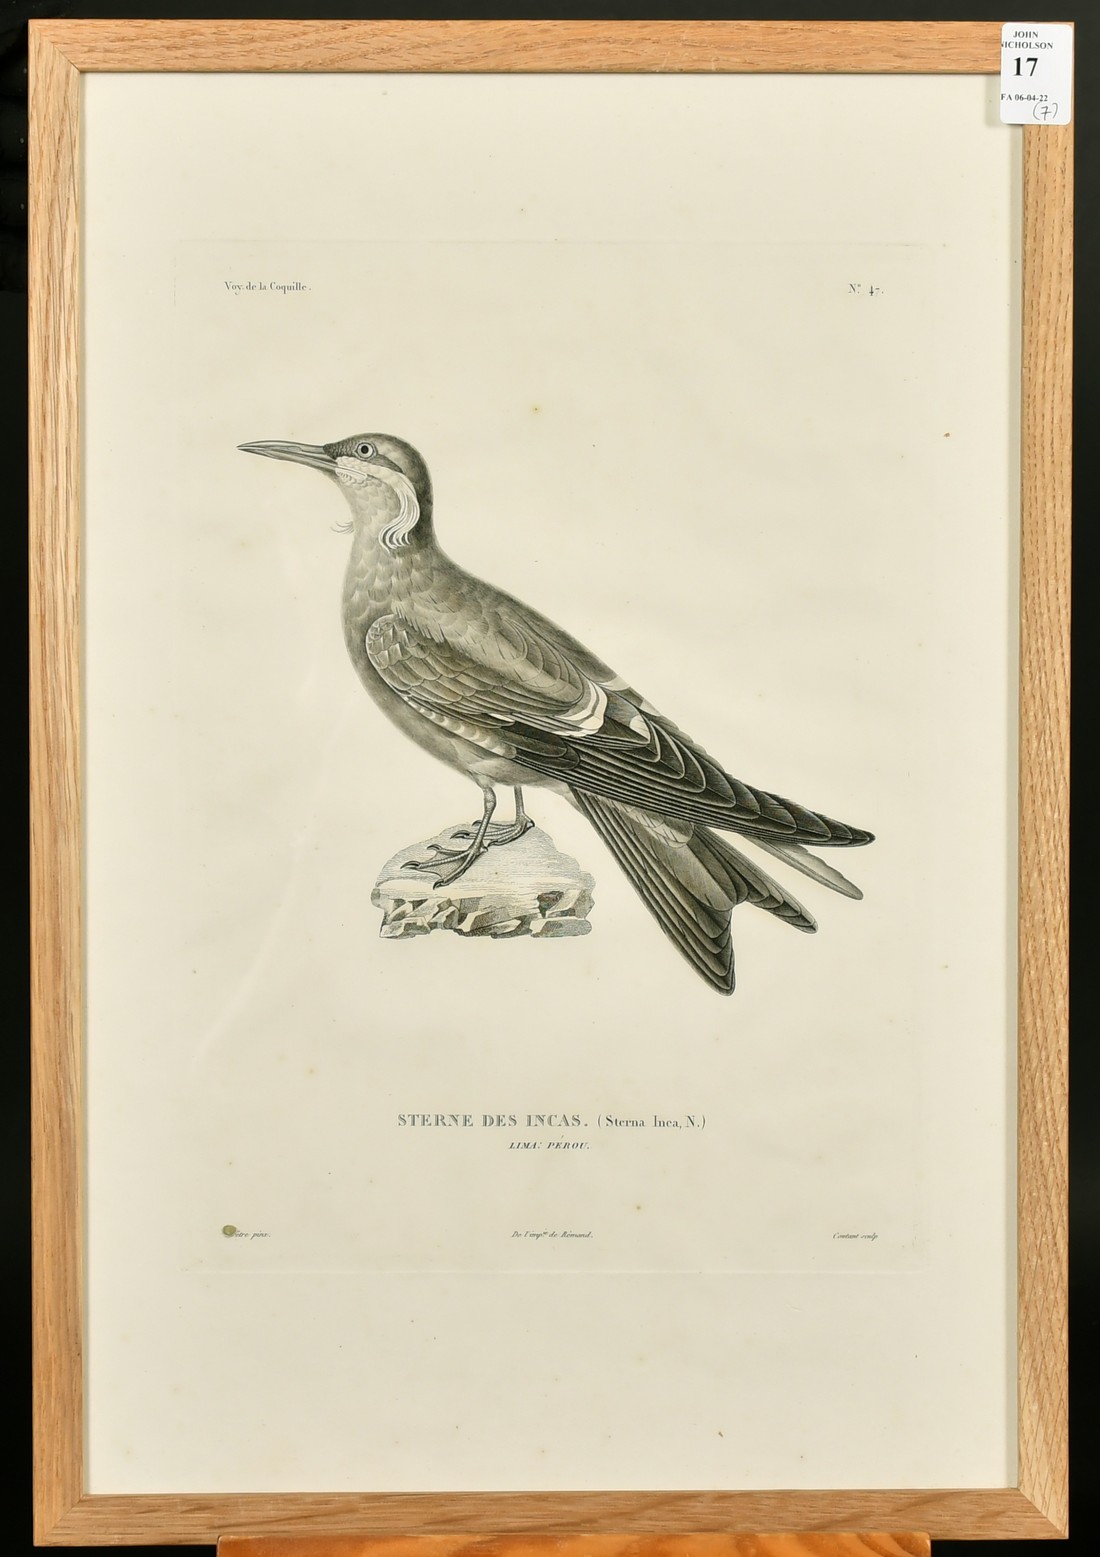 Coutant after Pretre, a group of seven ornithological plates from the voyage de la Coquille, each - Image 4 of 8